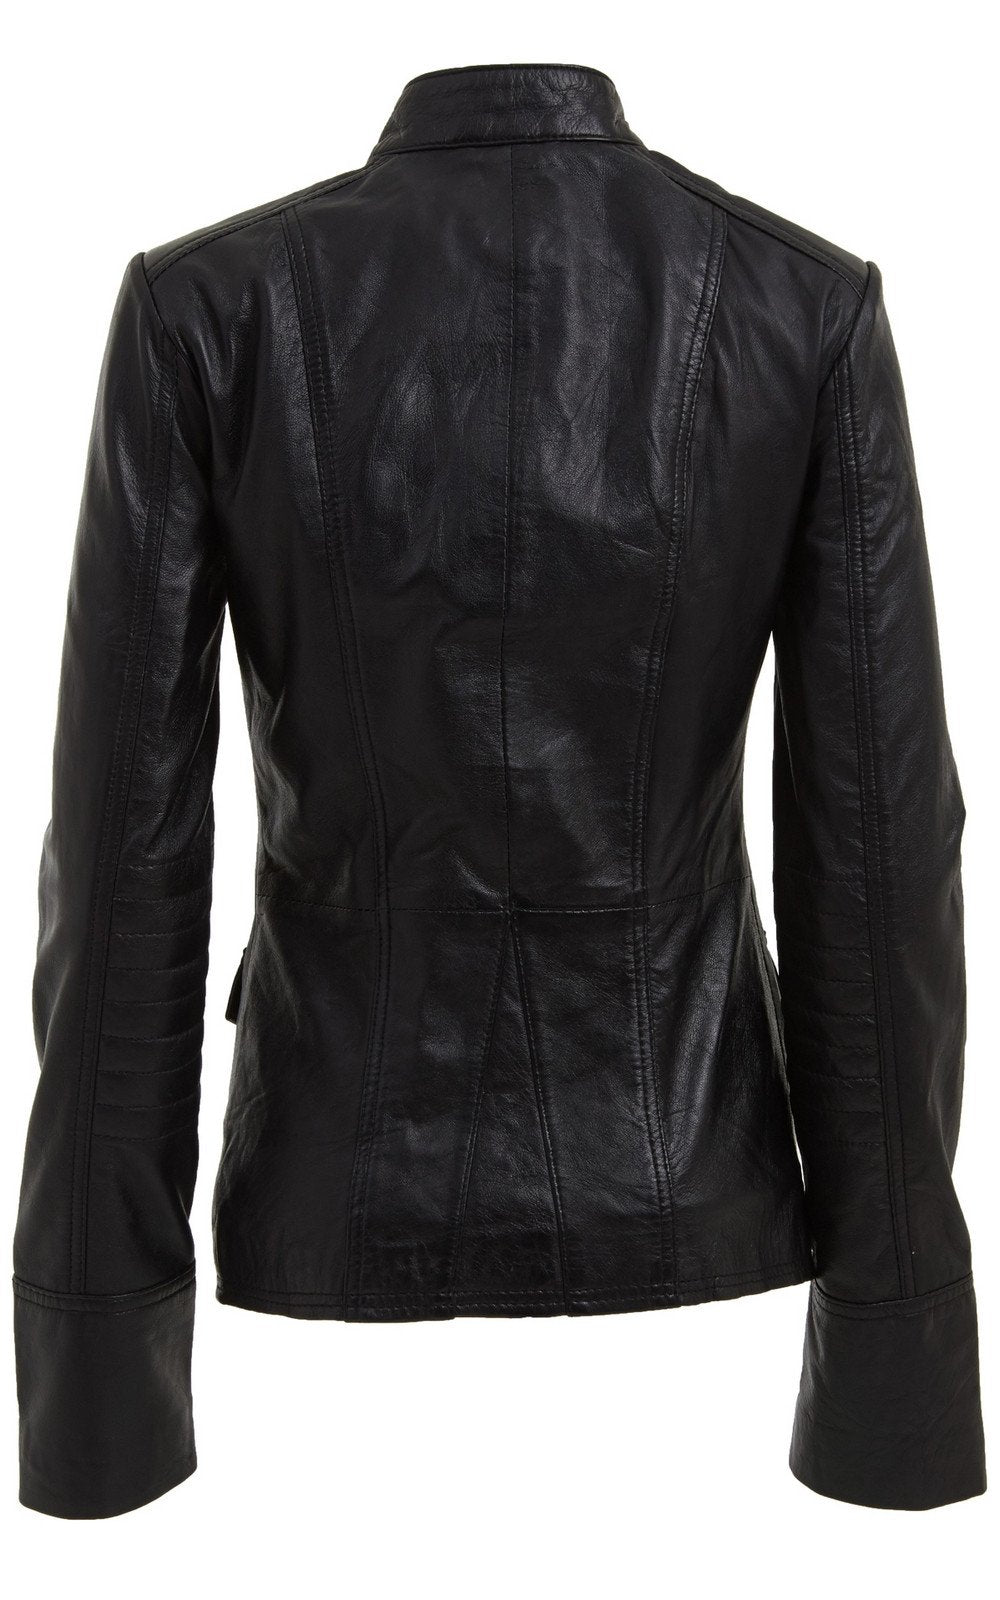 WOMENS BROWN AND BLACK MILITARY STYLE LEATHER BLAZER JACKET